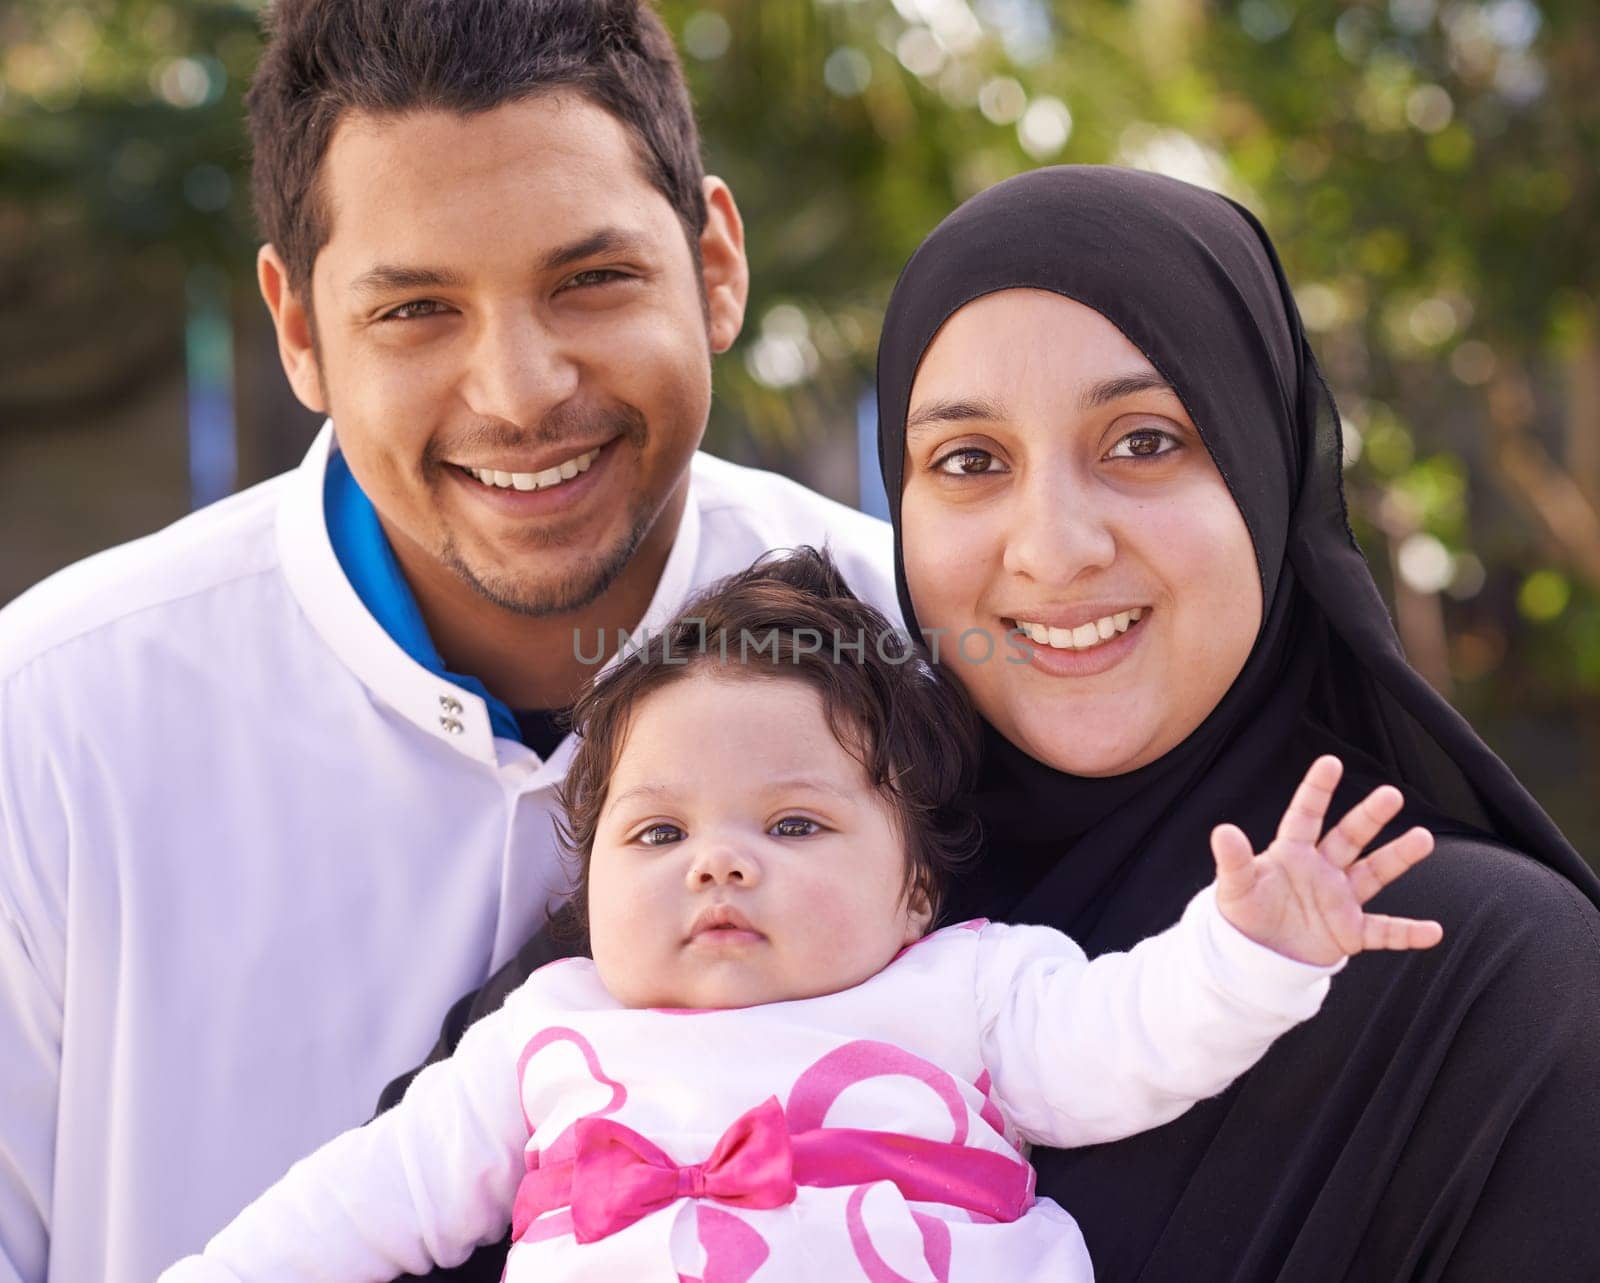 Muslim family, park and portrait of parents with baby for bonding, smile and outdoors together. Islam, happy and mother, father and newborn infant for love, childcare or support in garden by YuriArcurs